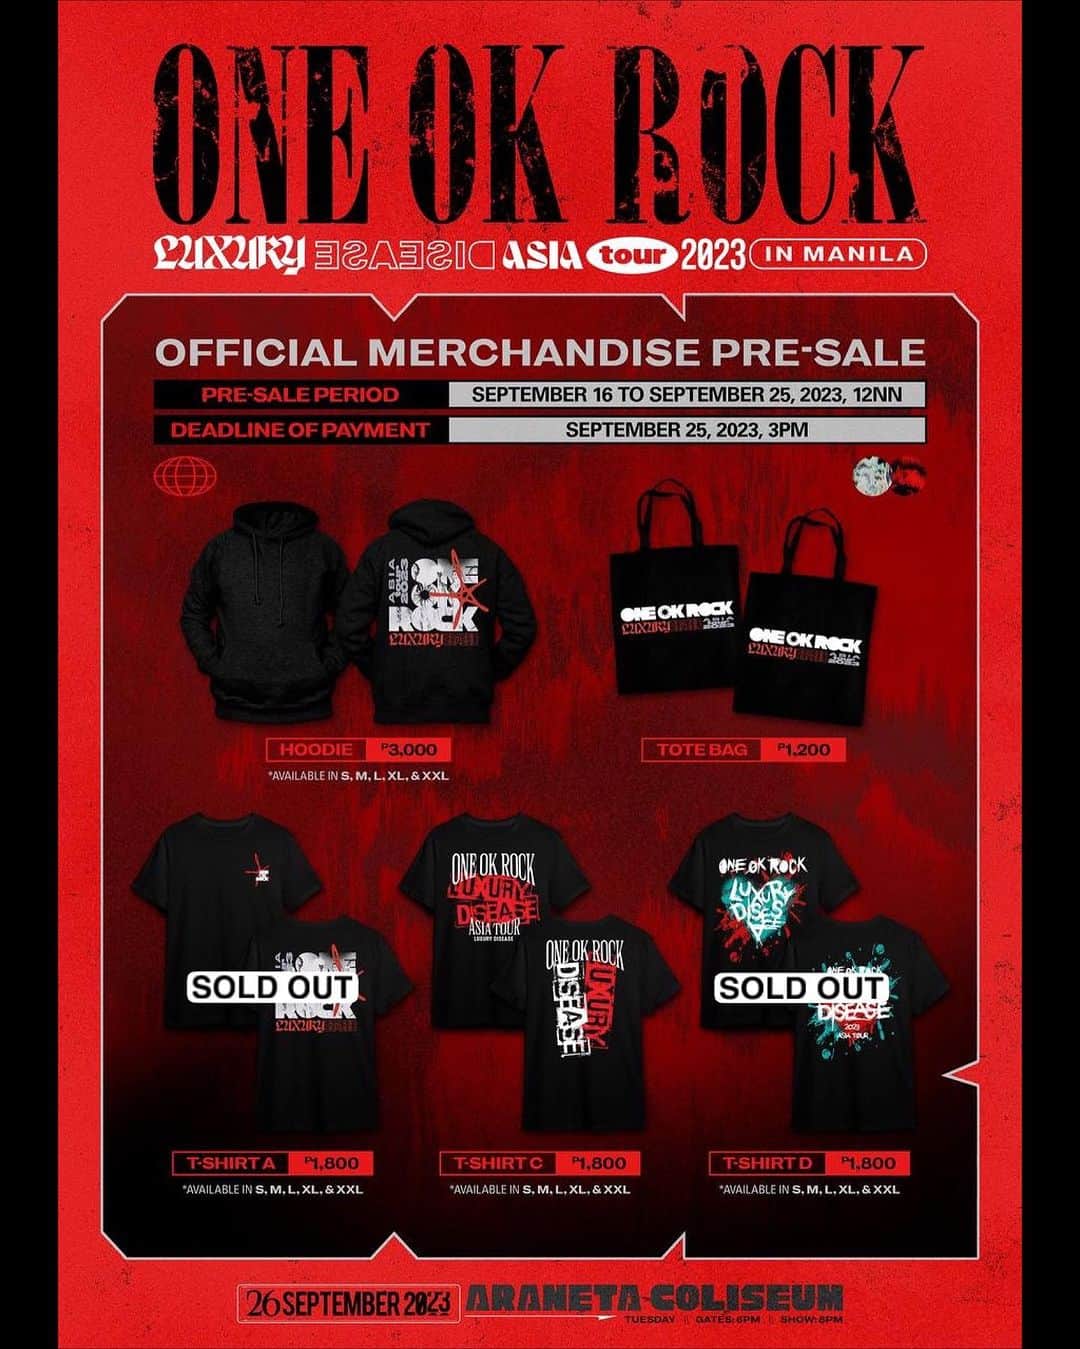 ONE OK ROCK WORLDのインスタグラム：「We found a better life with @oneokrockofficial 🤘 The moment you've all been waiting for is here.   #ONEOKROCKinMNL2023 official merch is now available for pre-sale! Hurry and grab yours before they're gone. 🔥    Pre-order link:  https://docs.google.com/forms/d/e/1FAIpQLScl57z9vlVAsA0IfcB7Lhjr3Do16JjcgXVK3eyt912sA6xPUA/viewform  Pre-Sale Period: September 16 to September 25,2023, 12NN Deadline of Payment: September 25, 2023, 3PM  ※Some items are already sold out※ - 9/26 に行われるフィリピンのマニラ公演でのオフィシャルグッズのプレセールが受付中です！ （※既に売り切れのアイテム有り）  詳しくは→ https://docs.google.com/forms/d/e/1FAIpQLScl57z9vlVAsA0IfcB7Lhjr3Do16JjcgXVK3eyt912sA6xPUA/viewform - #oneokrockofficial #10969taka #toru_10969 #tomo_10969 #ryota_0809 #luxurydisease#luxurydiseaseasiatour2023#manila」